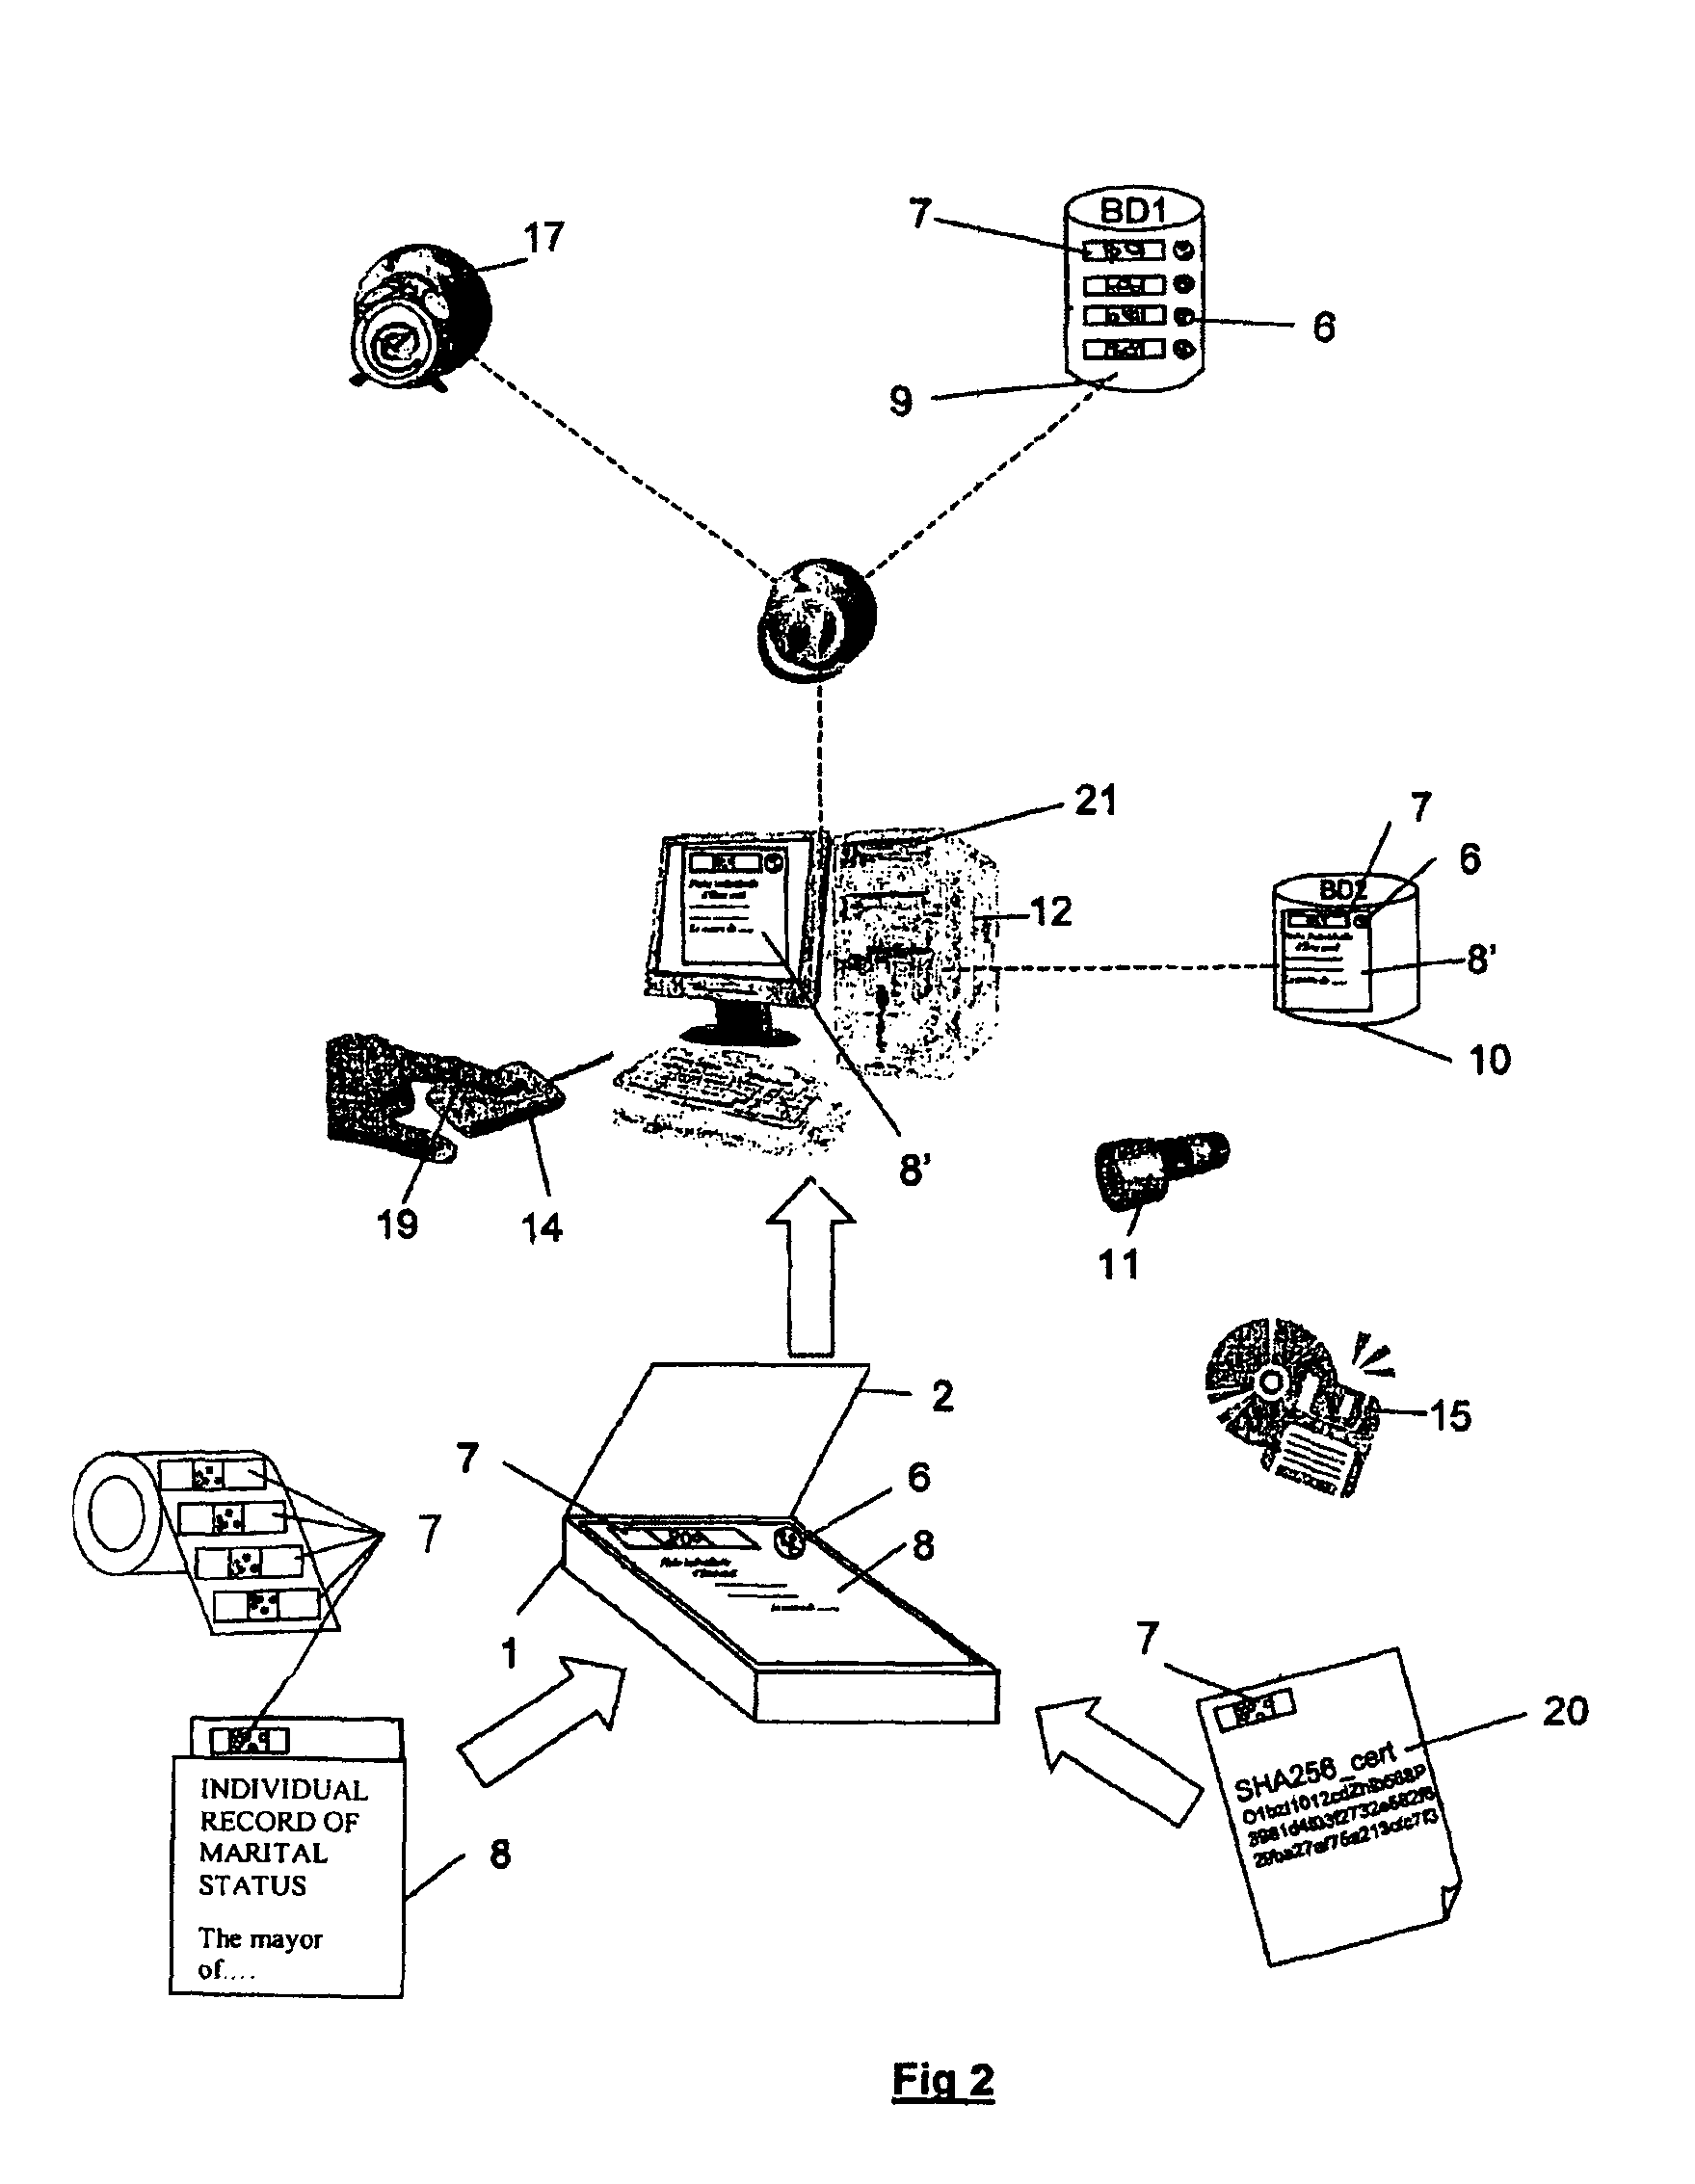 Method for certifying and subsequently authenticating original, paper of digital documents for evidences